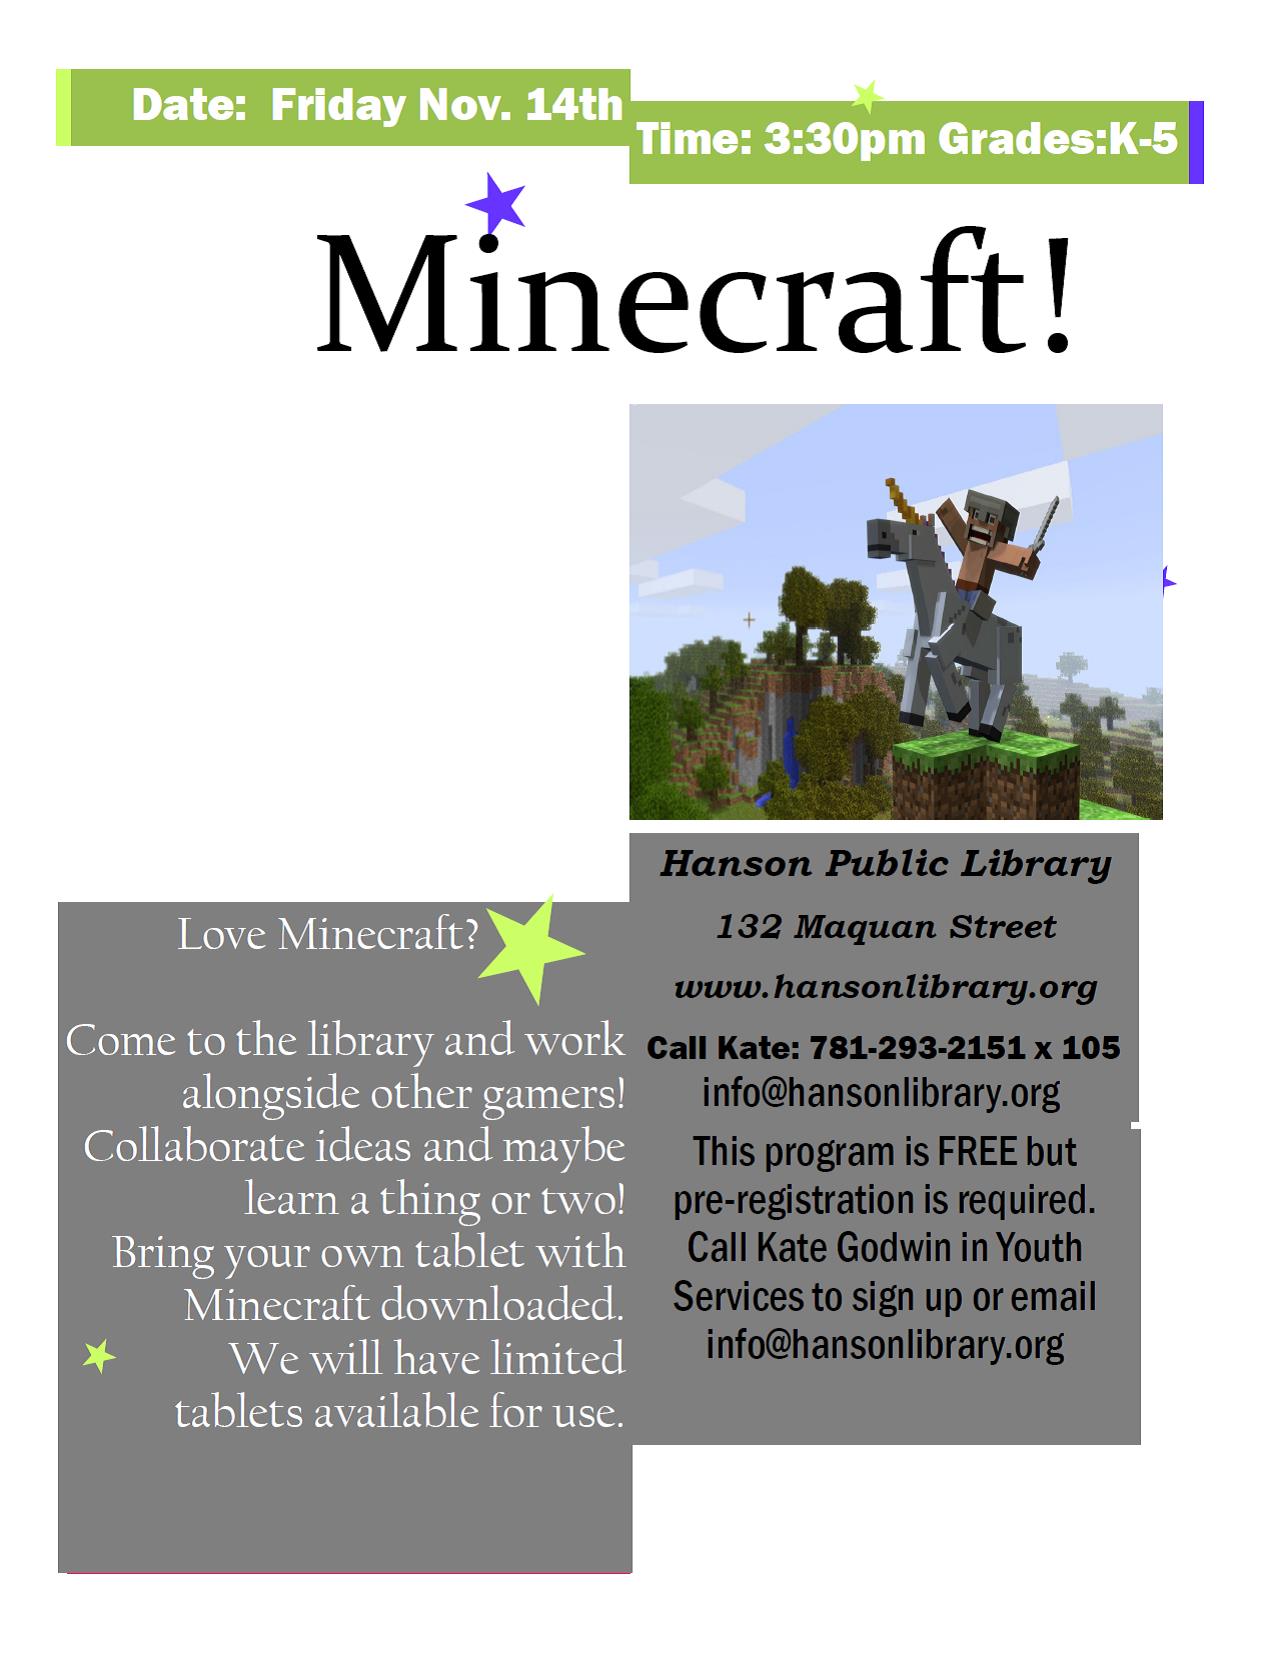 Minecraft program at the library